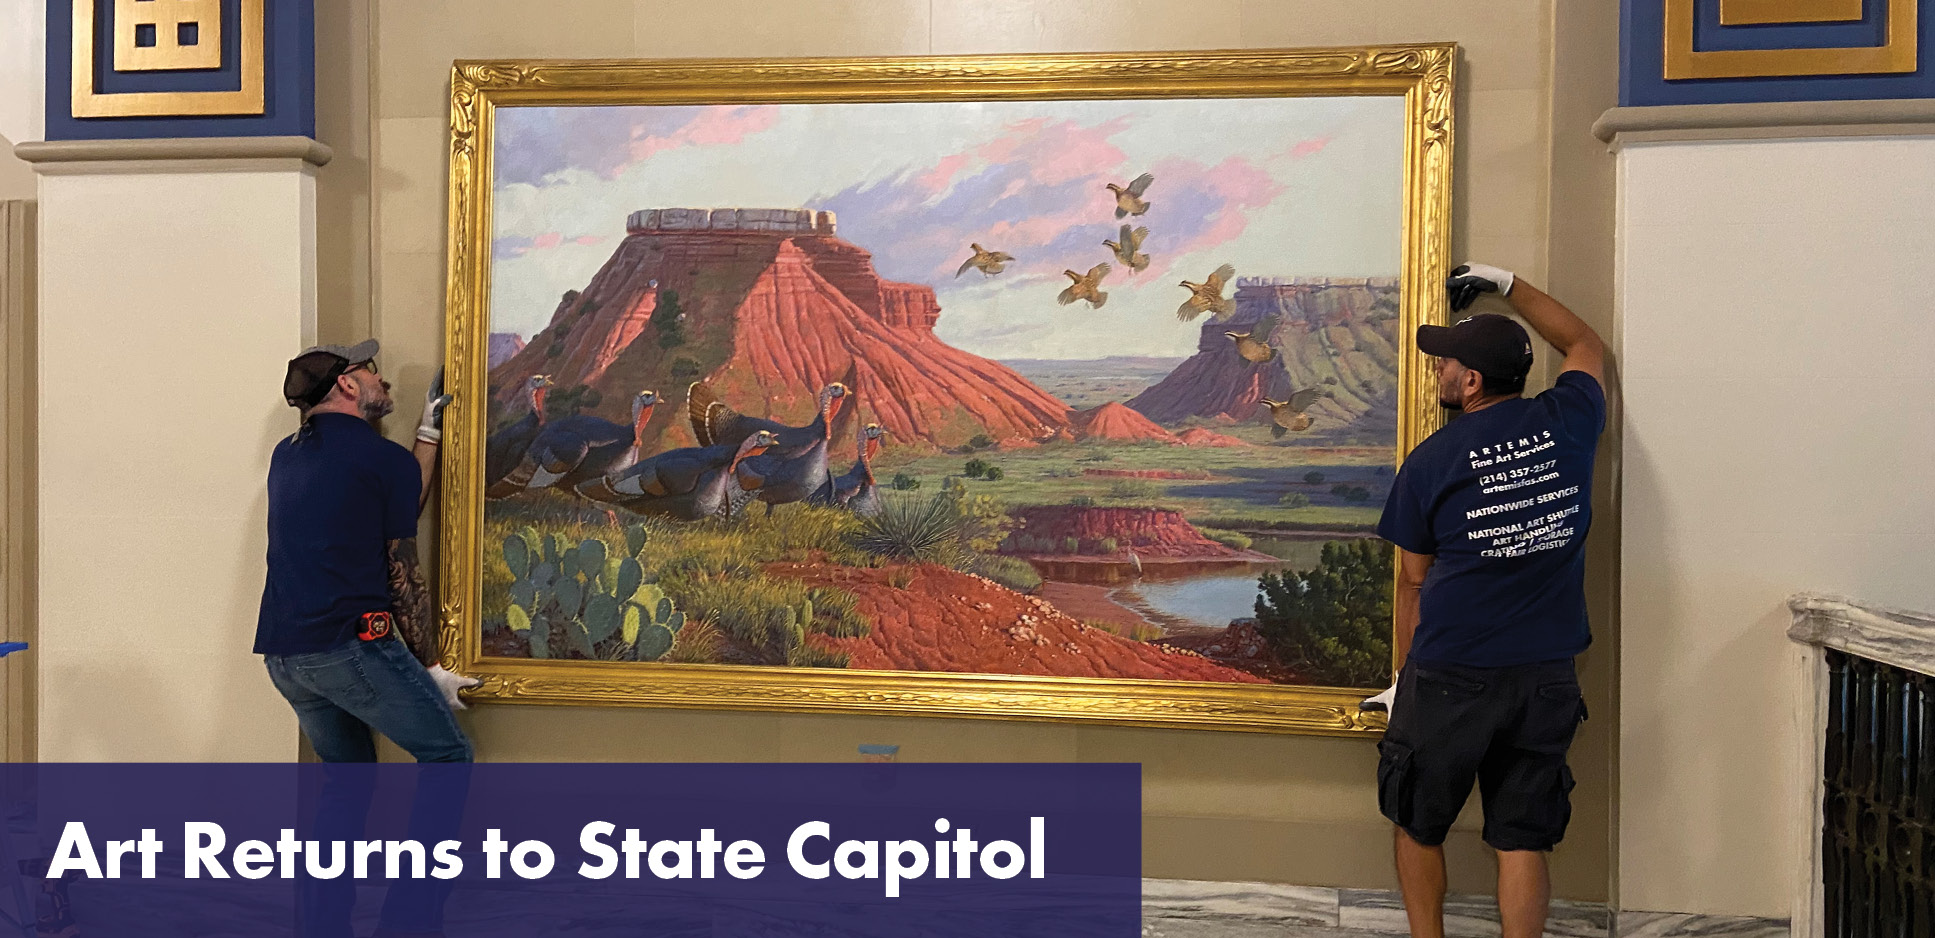 Art Returns to State Capitol. Two handlers installing a large painting.